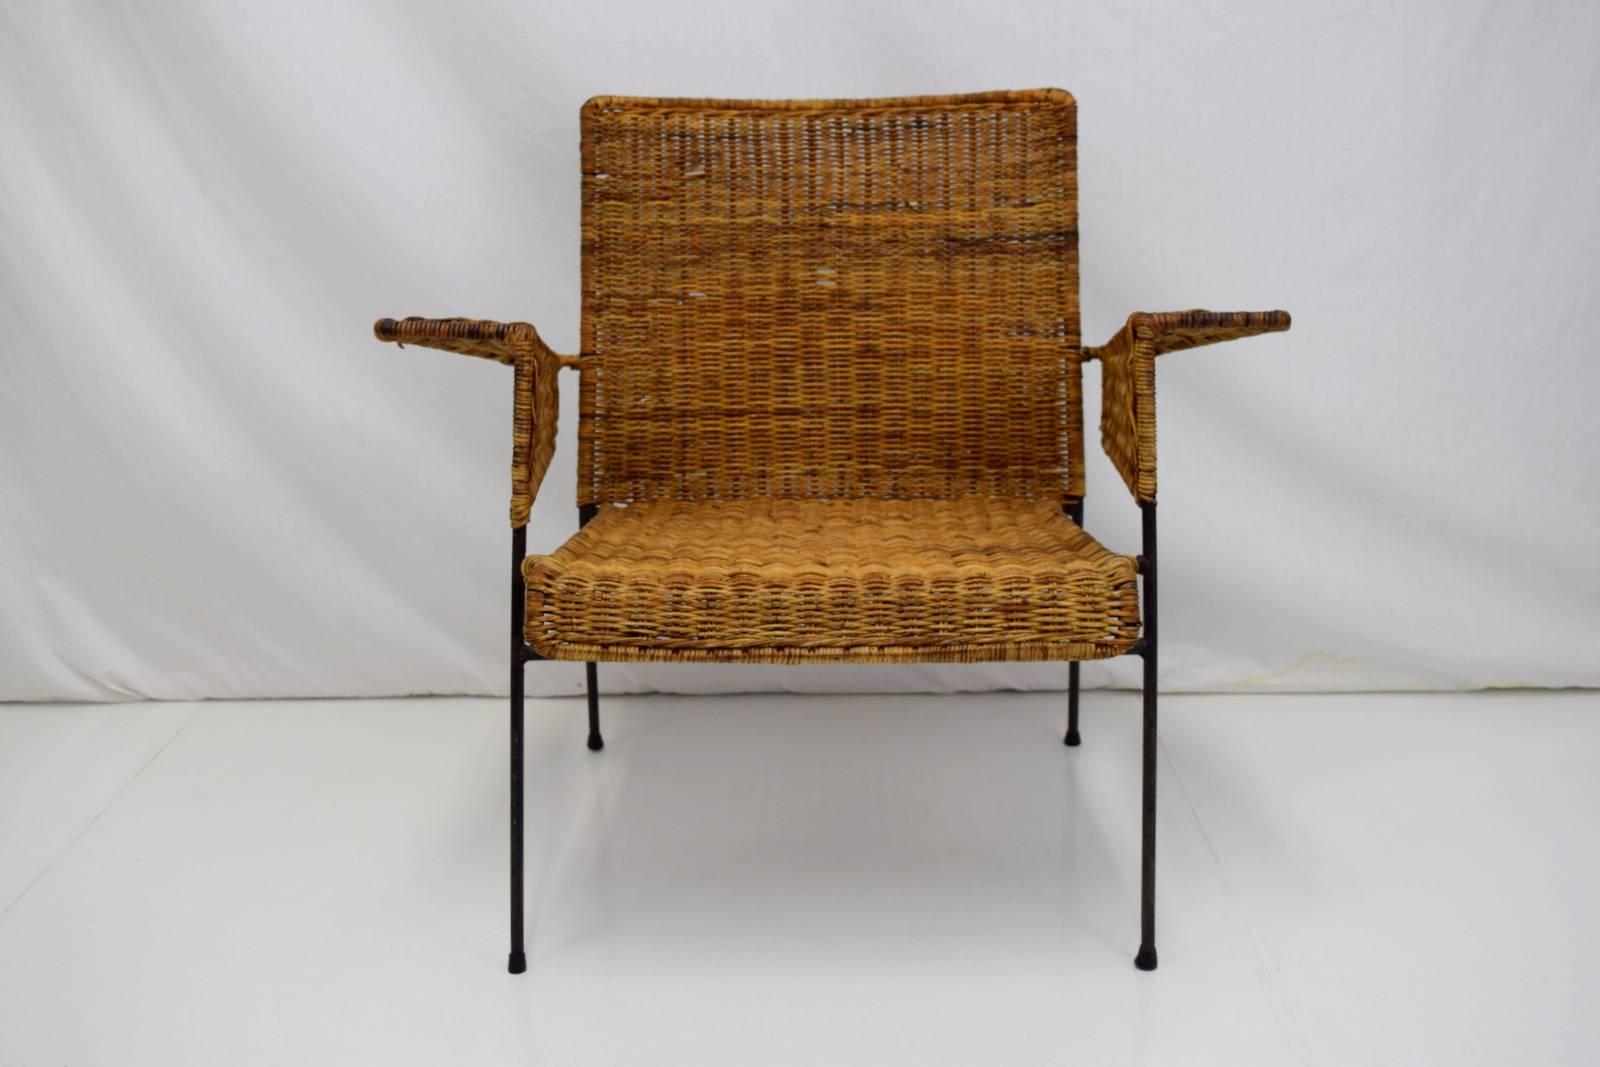 Early iron and wicker lounge chair by Van Keppel-Green. Classic California modernist lines and craftsmanship sets this chair apart. Lovely patina to wicker and iron frame with some breaks and loss to wicker. A three-piece modular set also available.